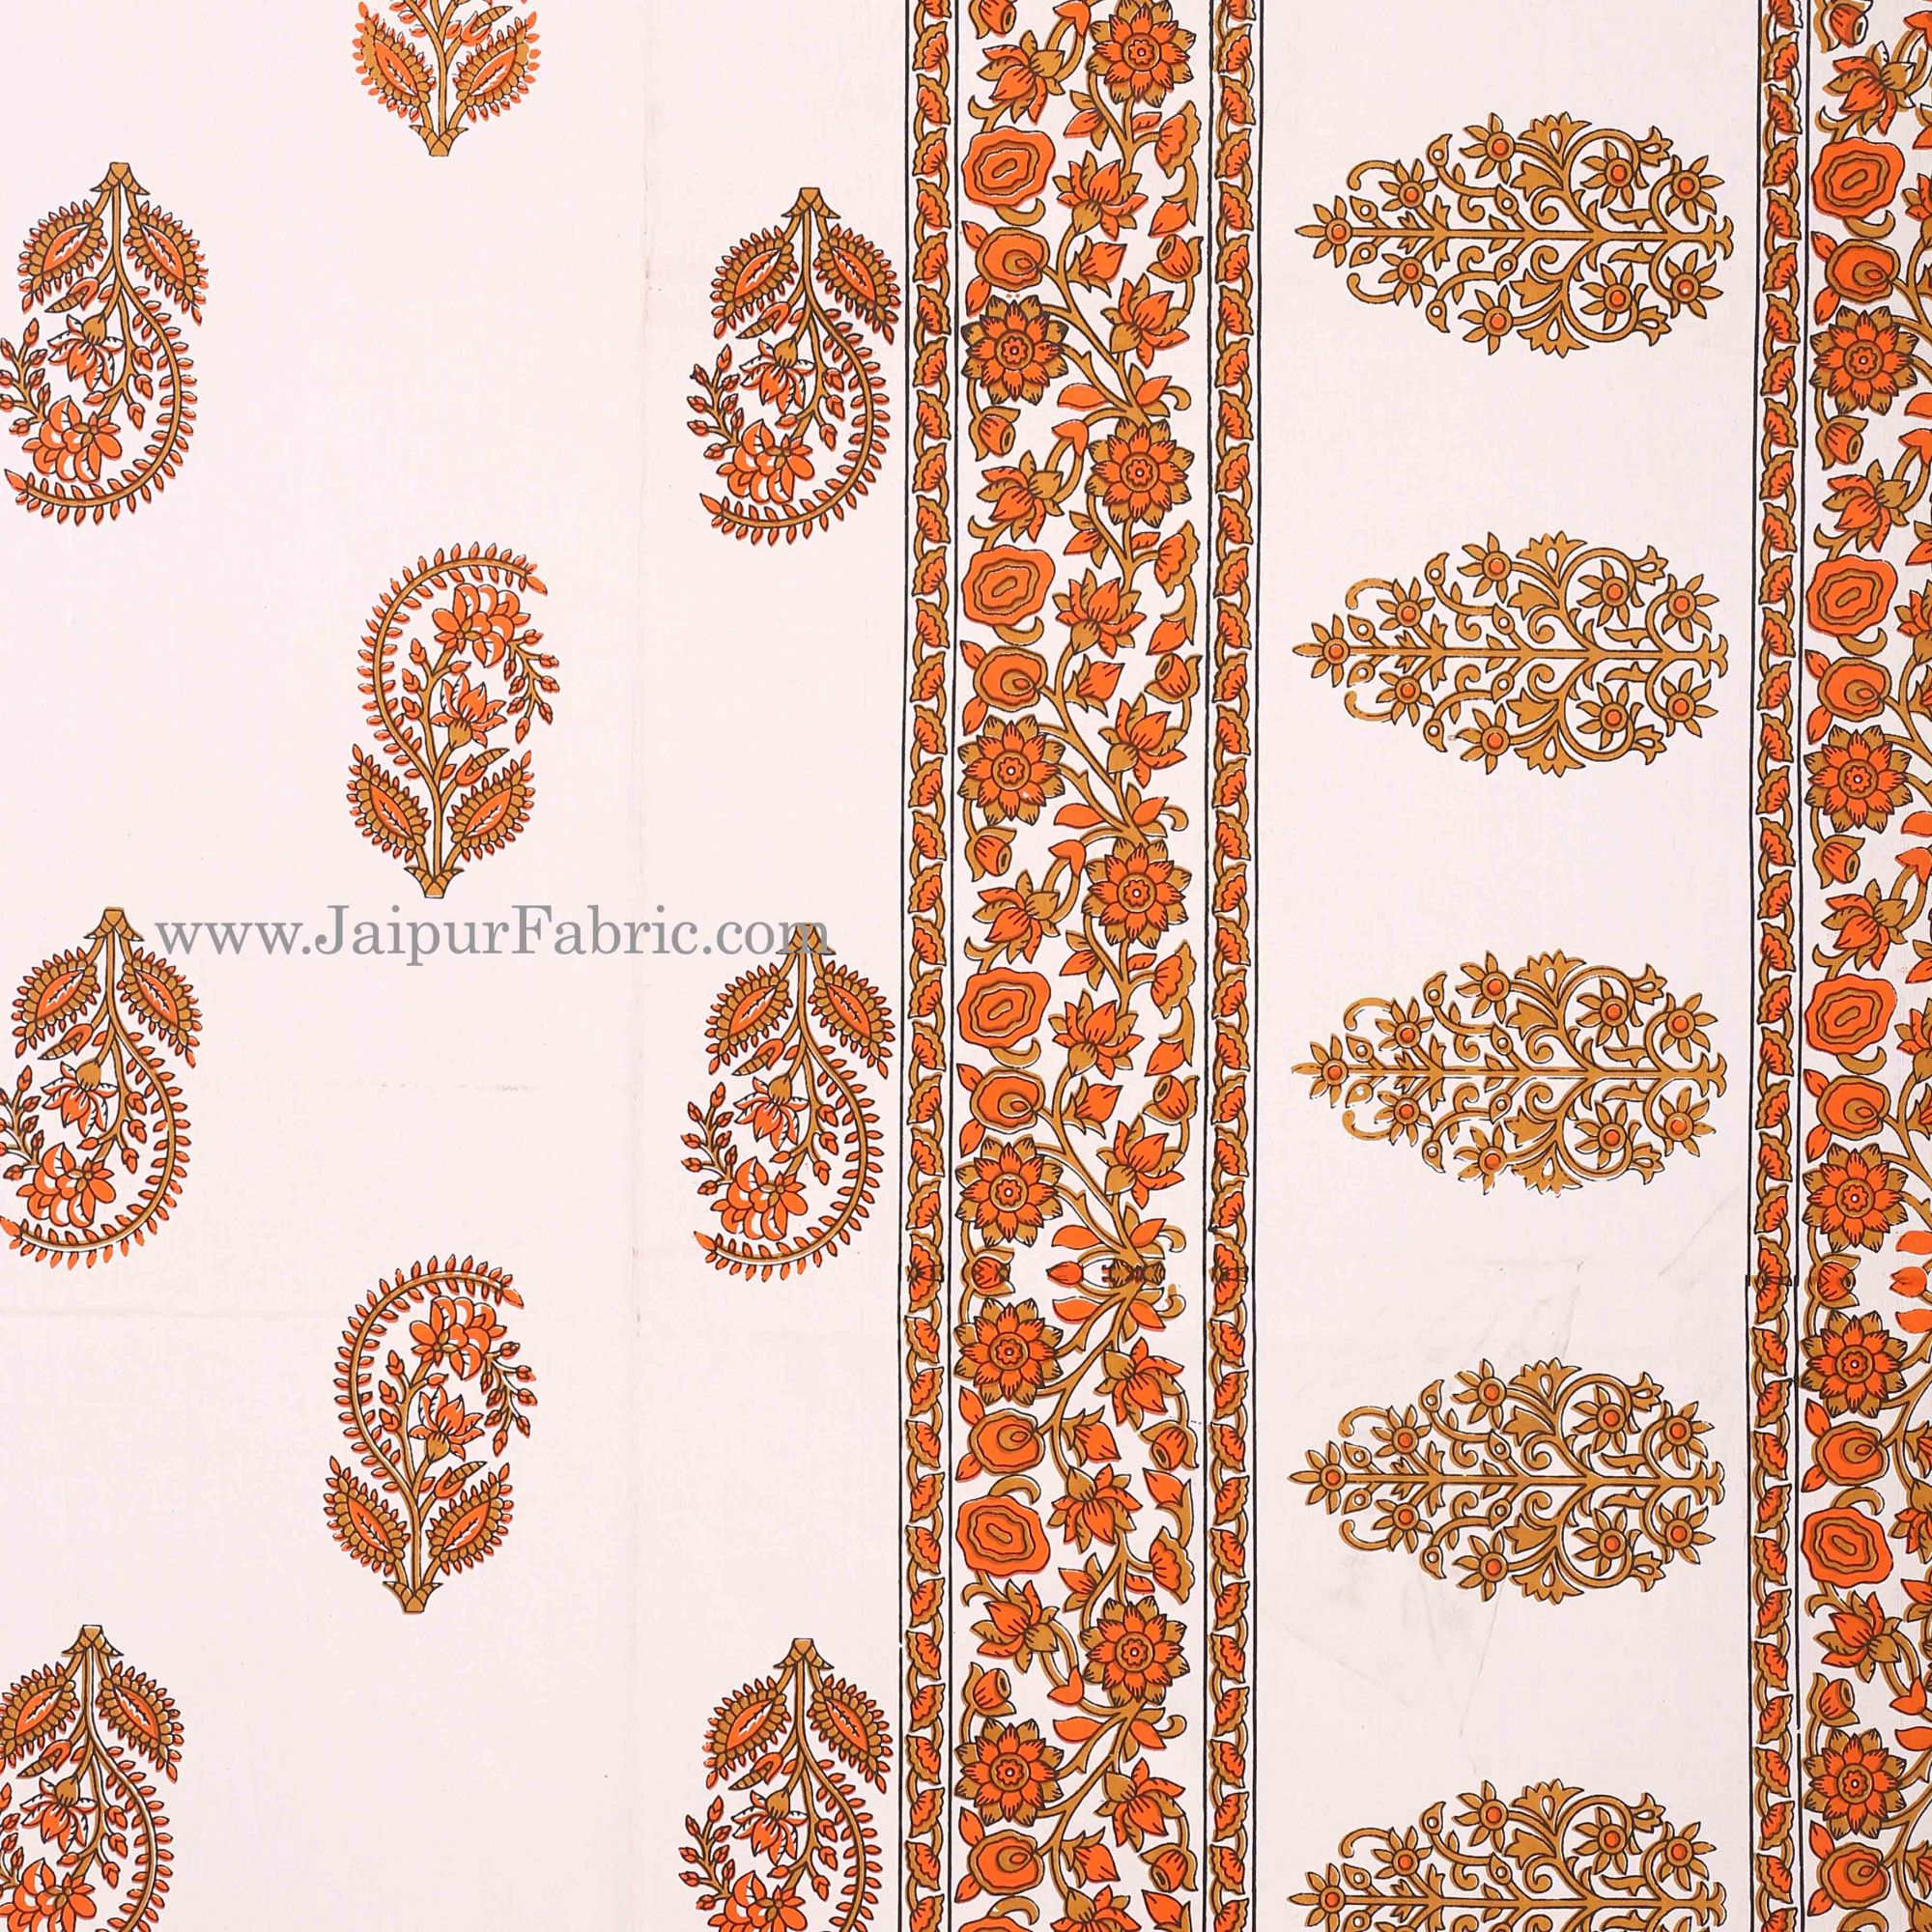 Brown Border White Base Gamla And Booti Print Cotton Double Bed Sheet